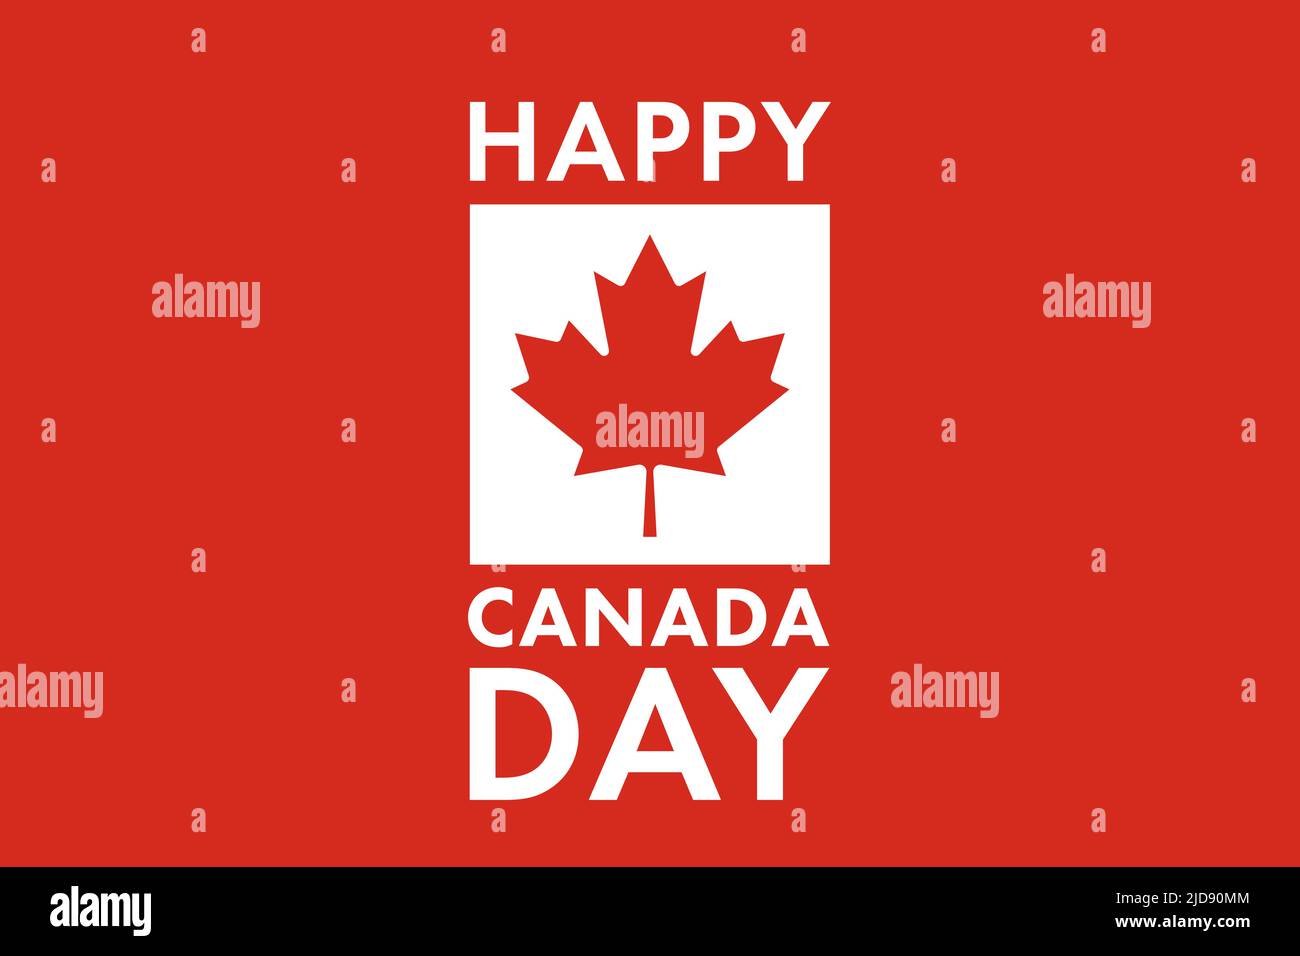 Canada day 1st July. Happy Canada Day modern cover, banner, card or poster, design concept with text and canadian flag maple leaf on a red background. Stock Photo